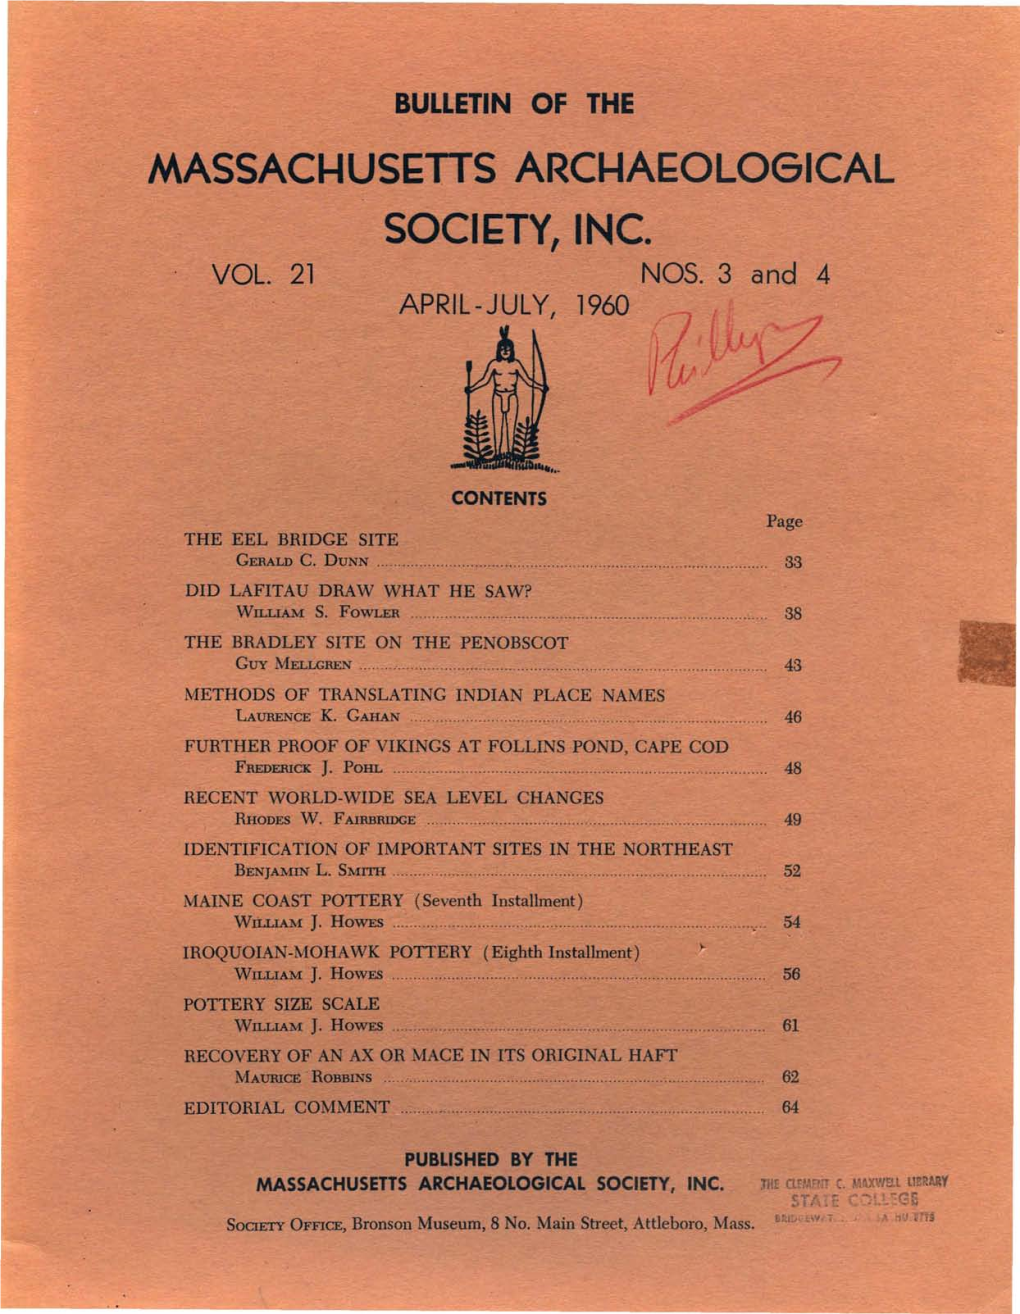 Bulletin of the Massachusetts Archaeological Society, Vol. 21, No